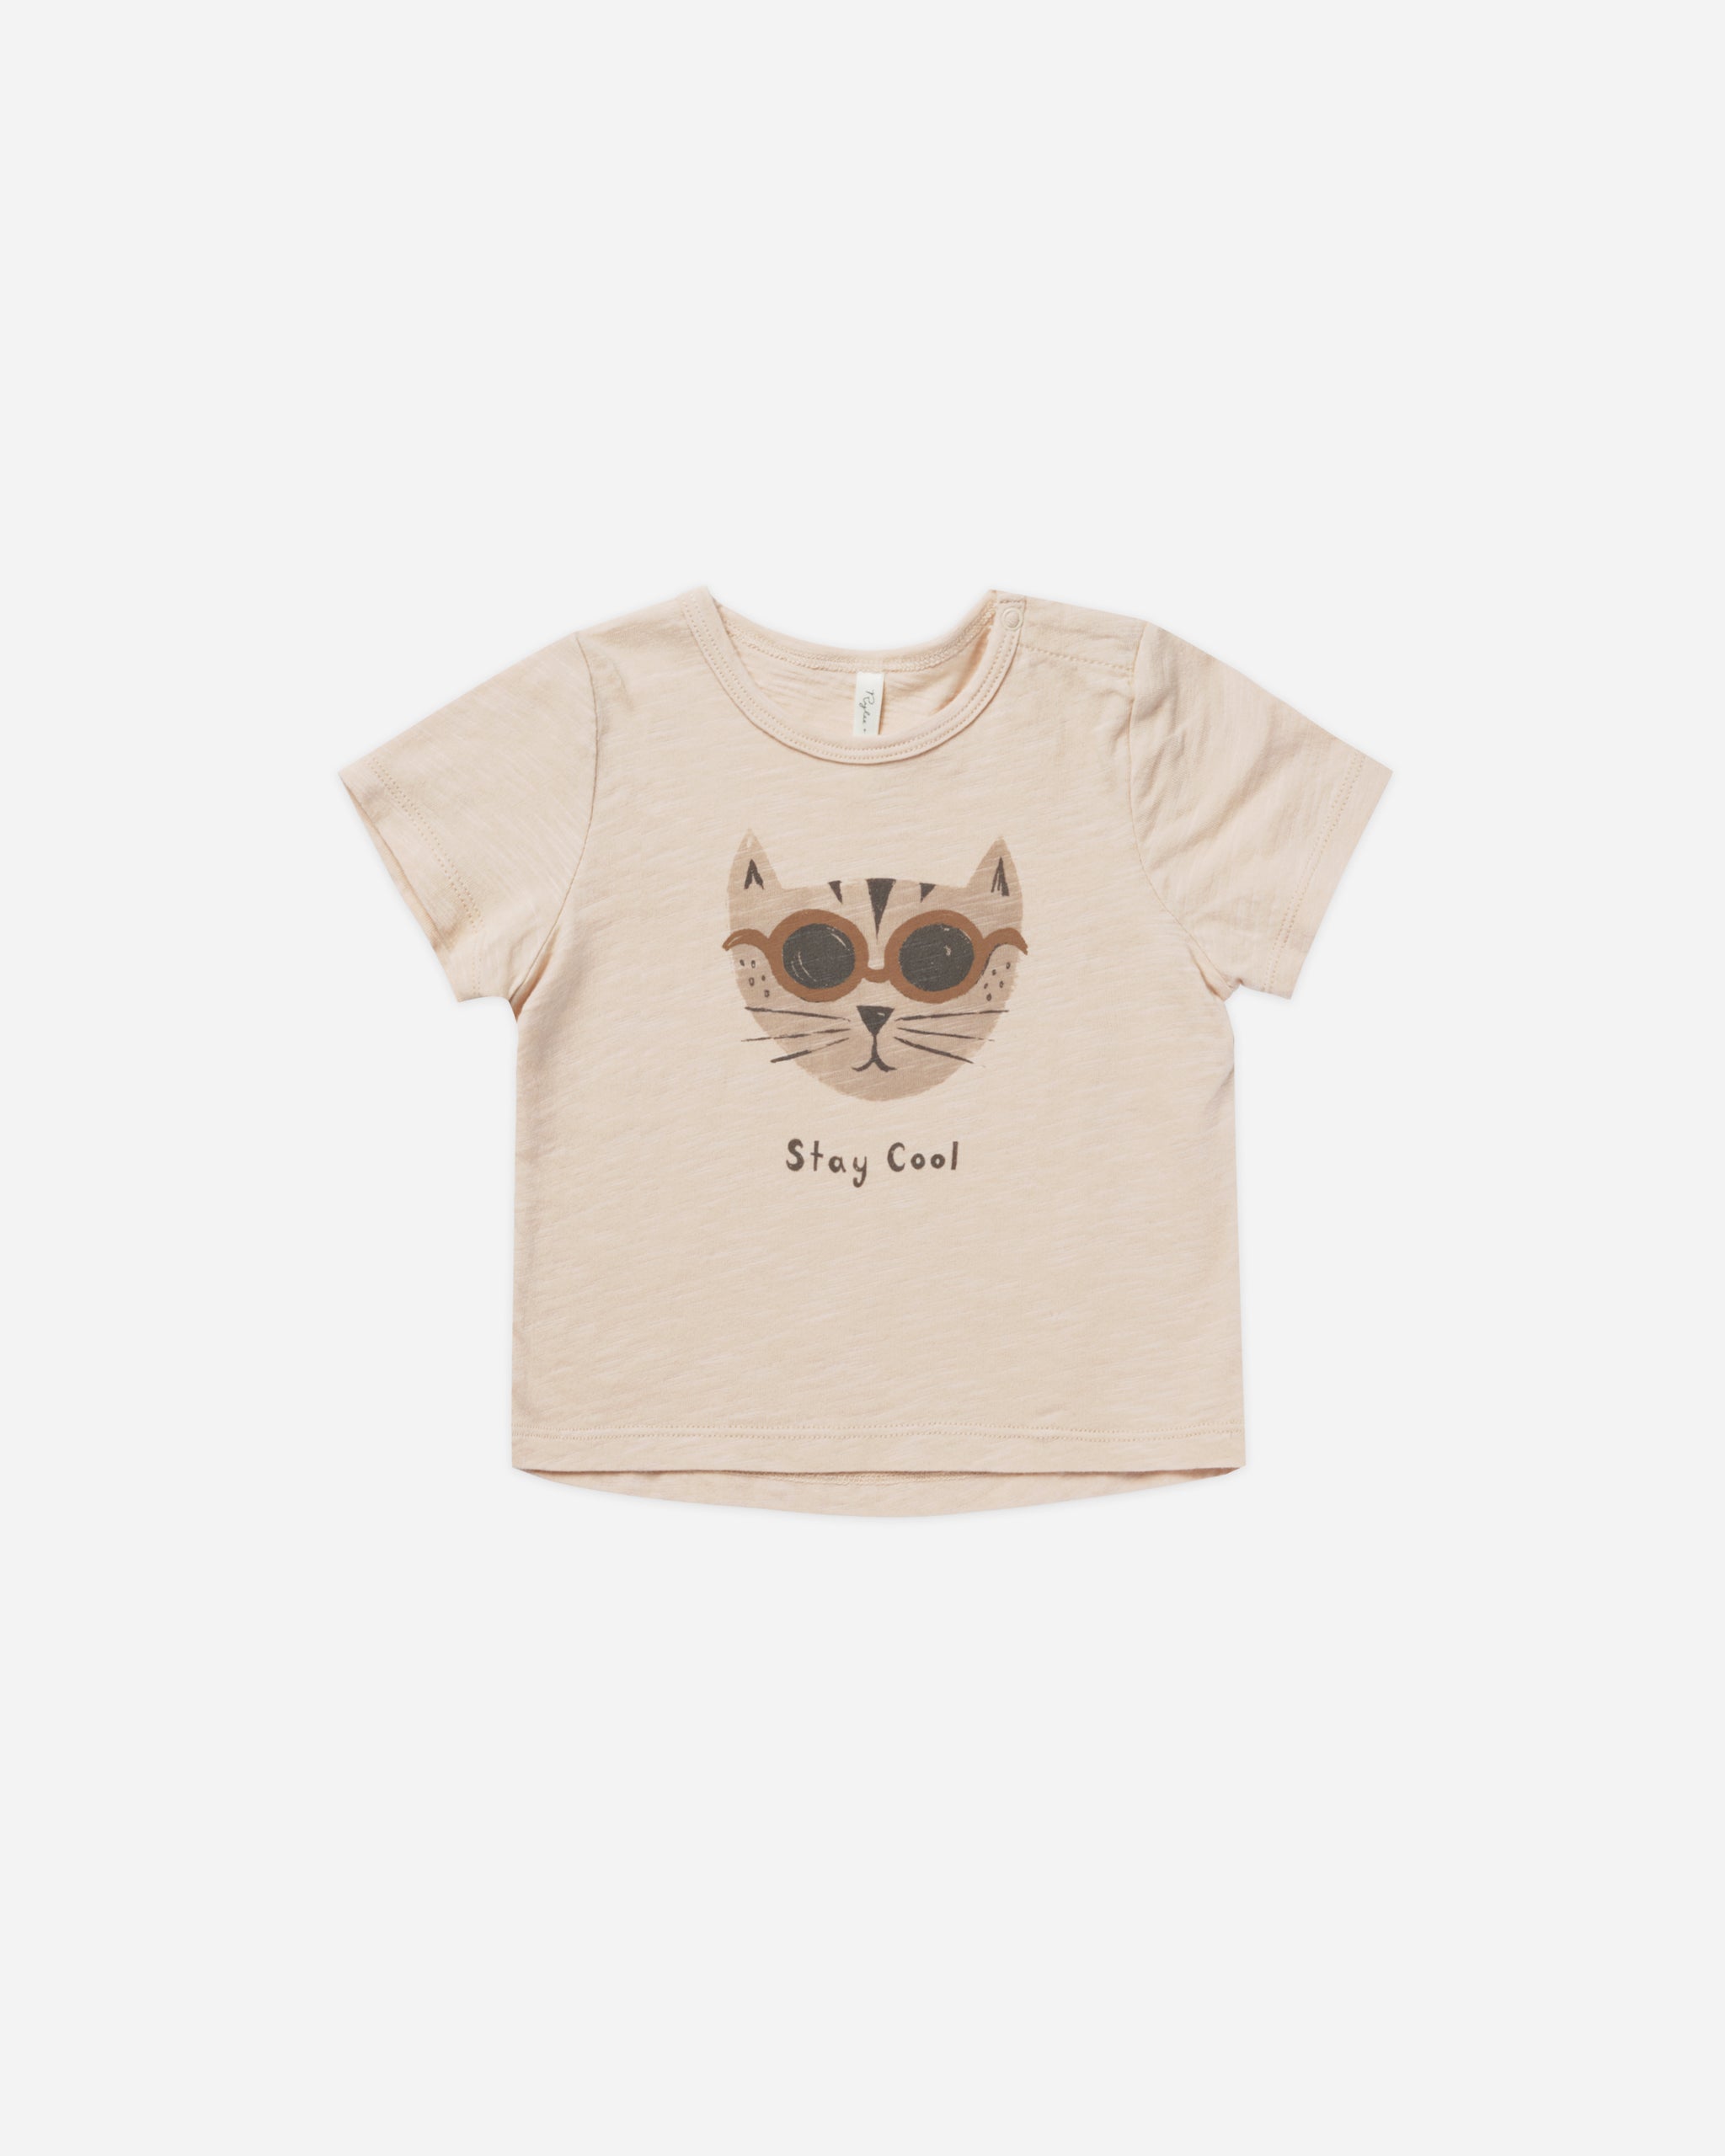 Basic Tee || Stay Cool - Rylee + Cru | Kids Clothes | Trendy Baby Clothes | Modern Infant Outfits |